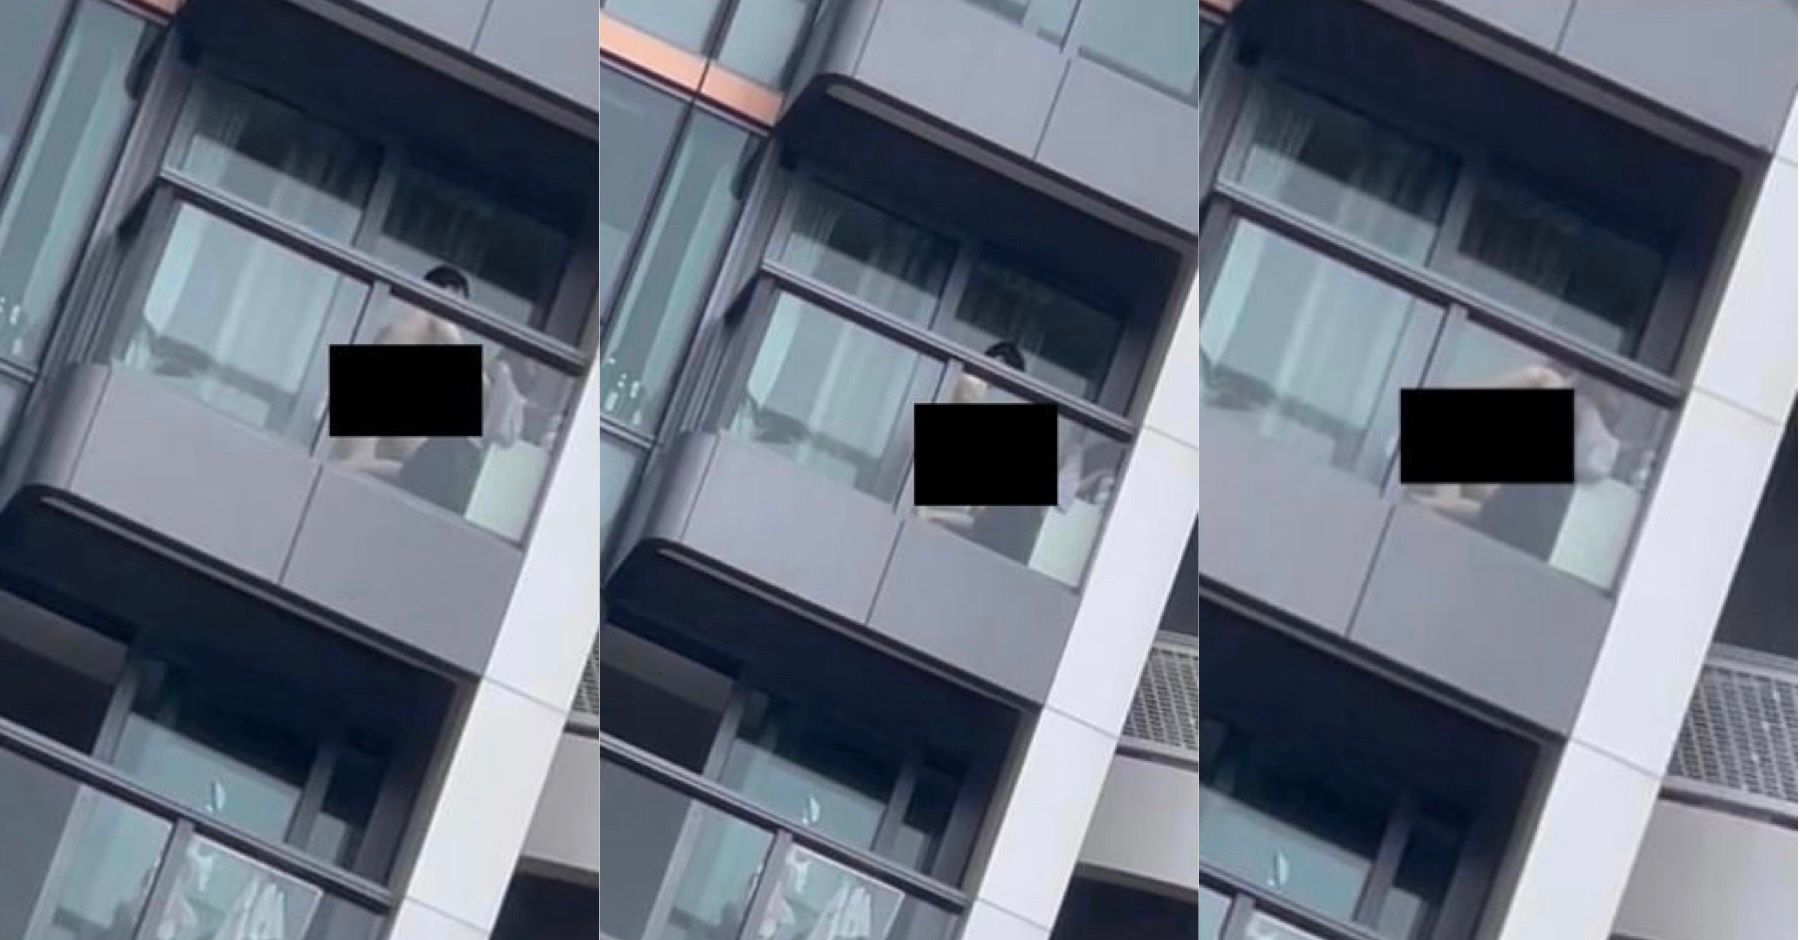 Clip of duo having sex on balcony goes viral, woman arrested and released on bail Coconuts